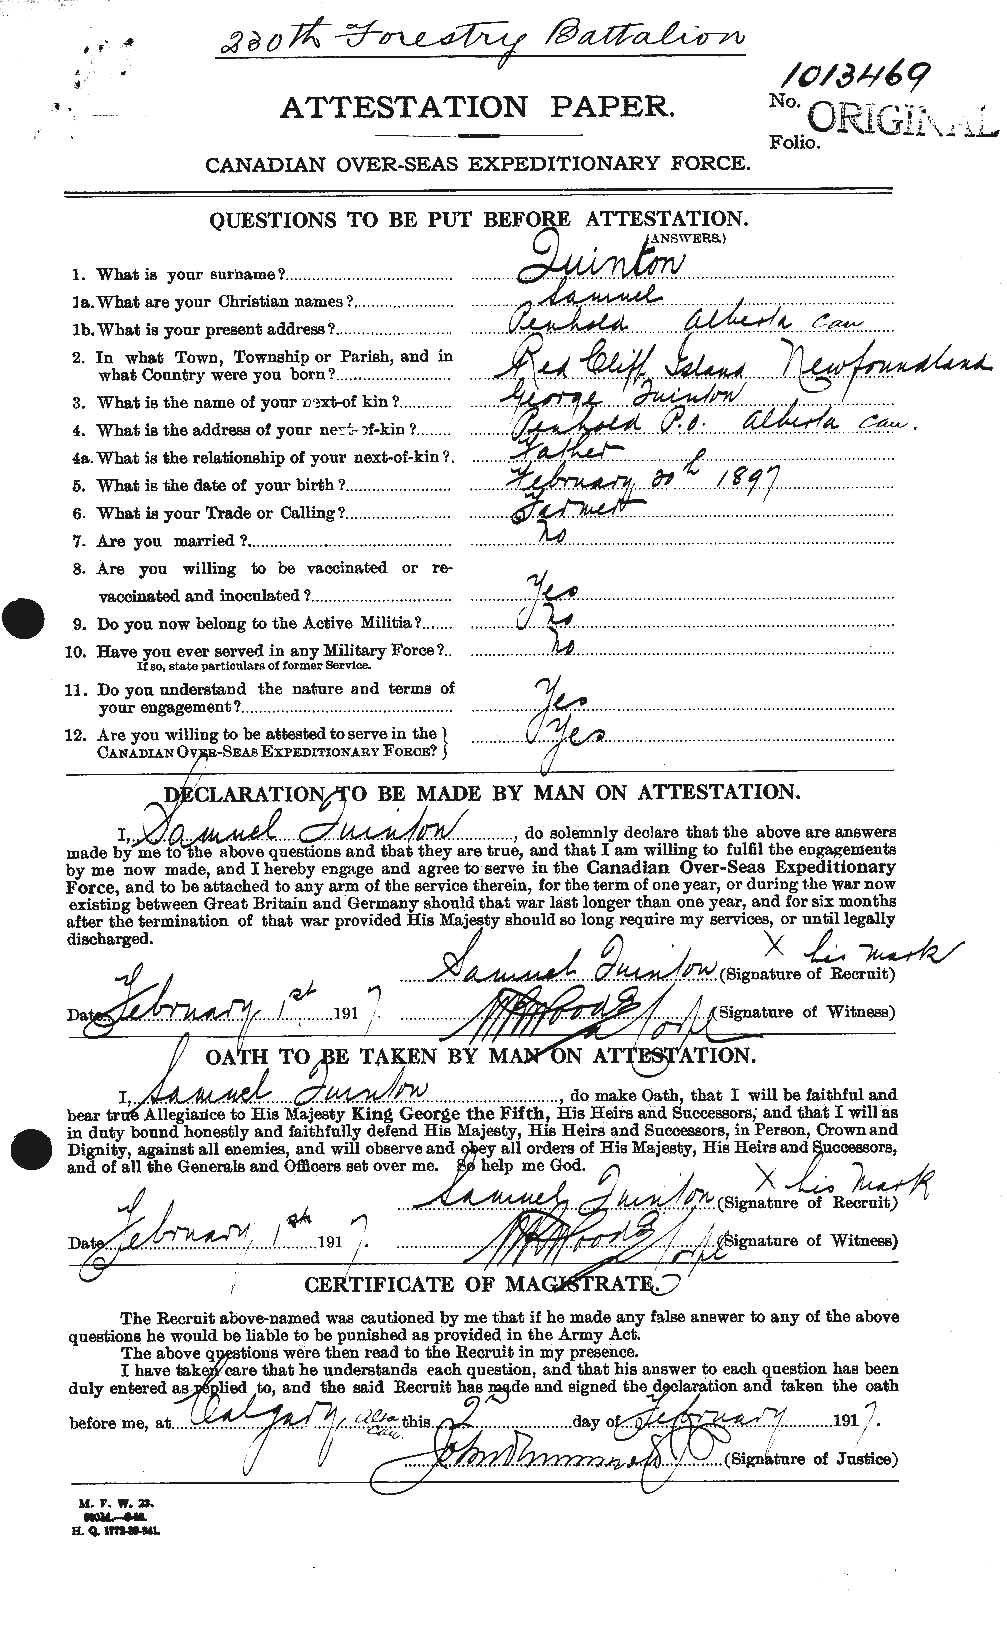 Personnel Records of the First World War - CEF 590594a